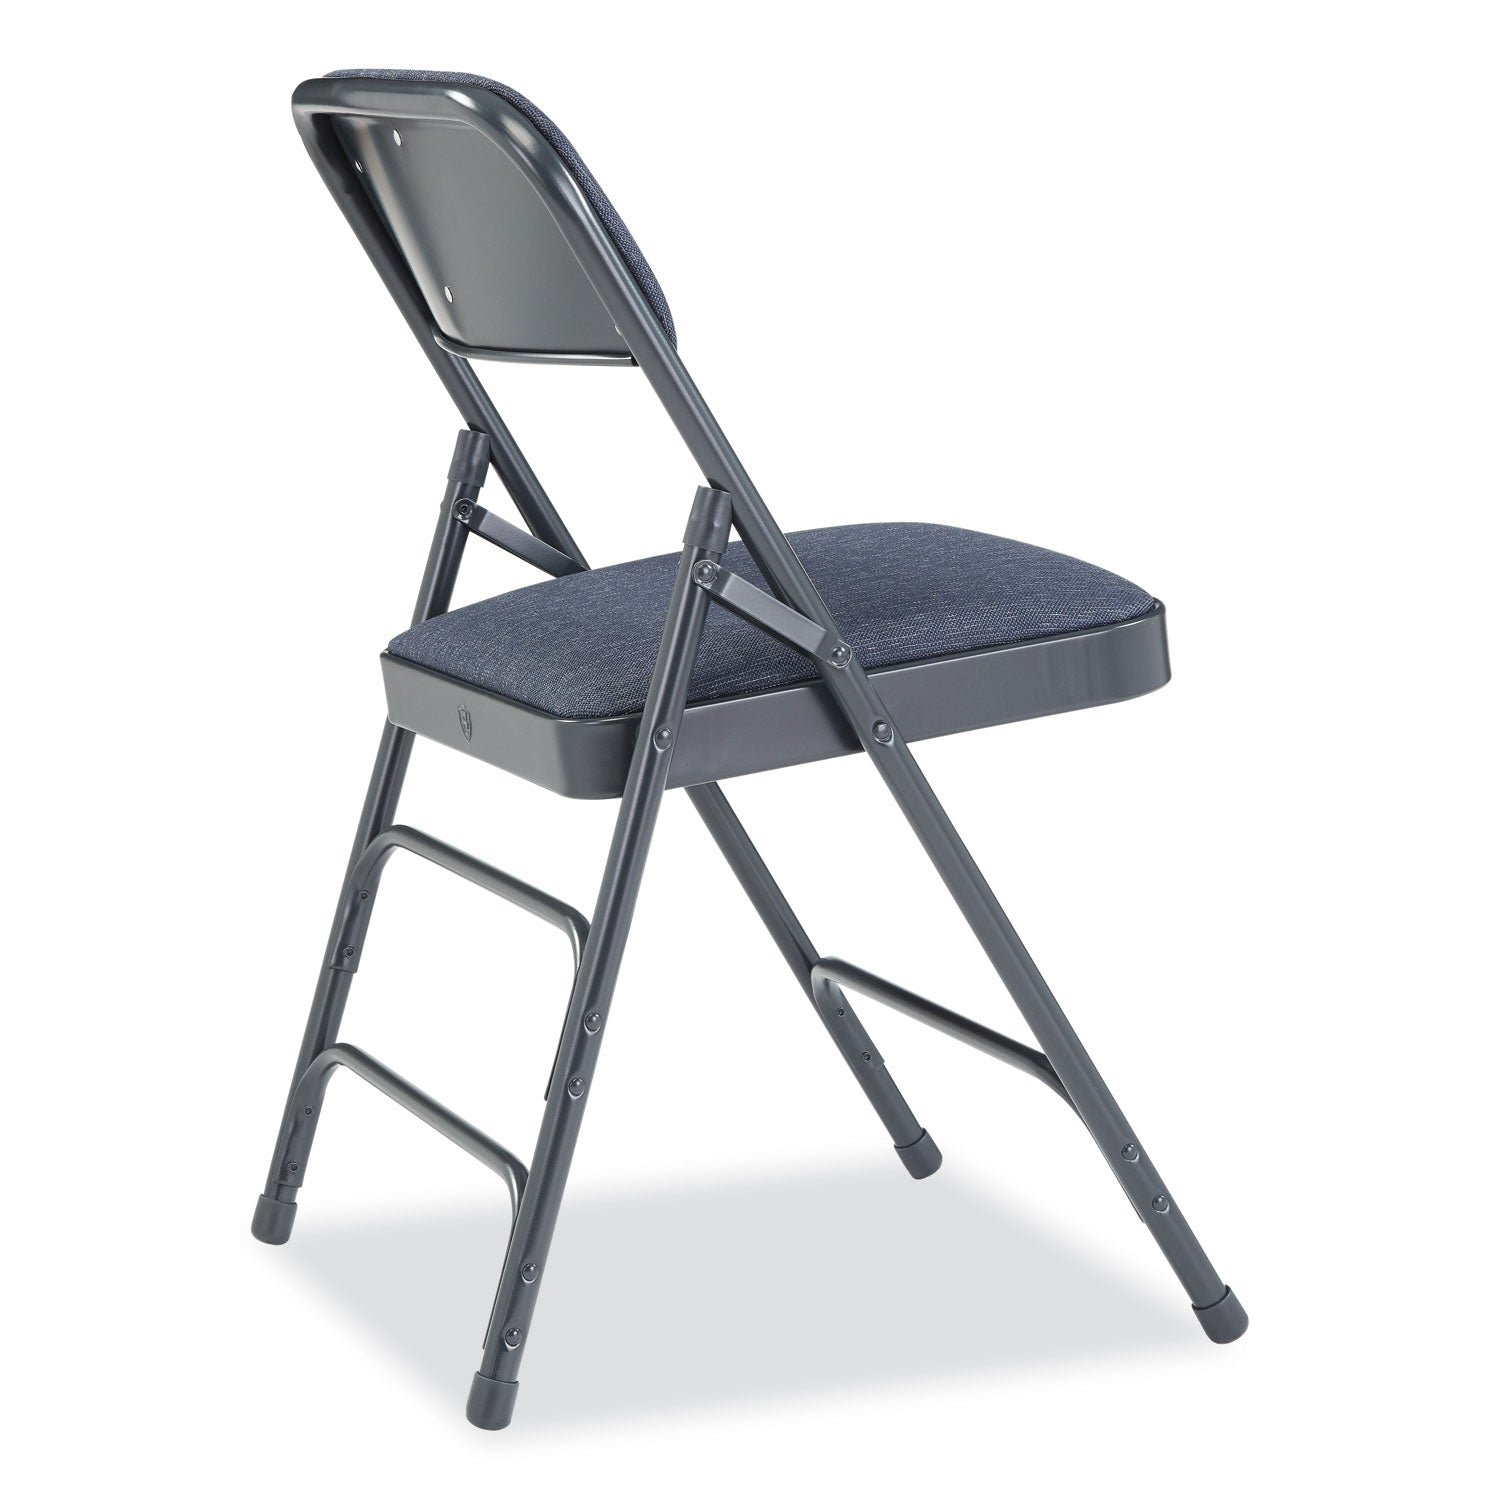 2300-series-deluxe-fabric-upholstered-triple-brace-folding-chair-supports-500-lb-imperial-blue-4-ct-ships-in-1-3-bus-days_nps2304 - 4